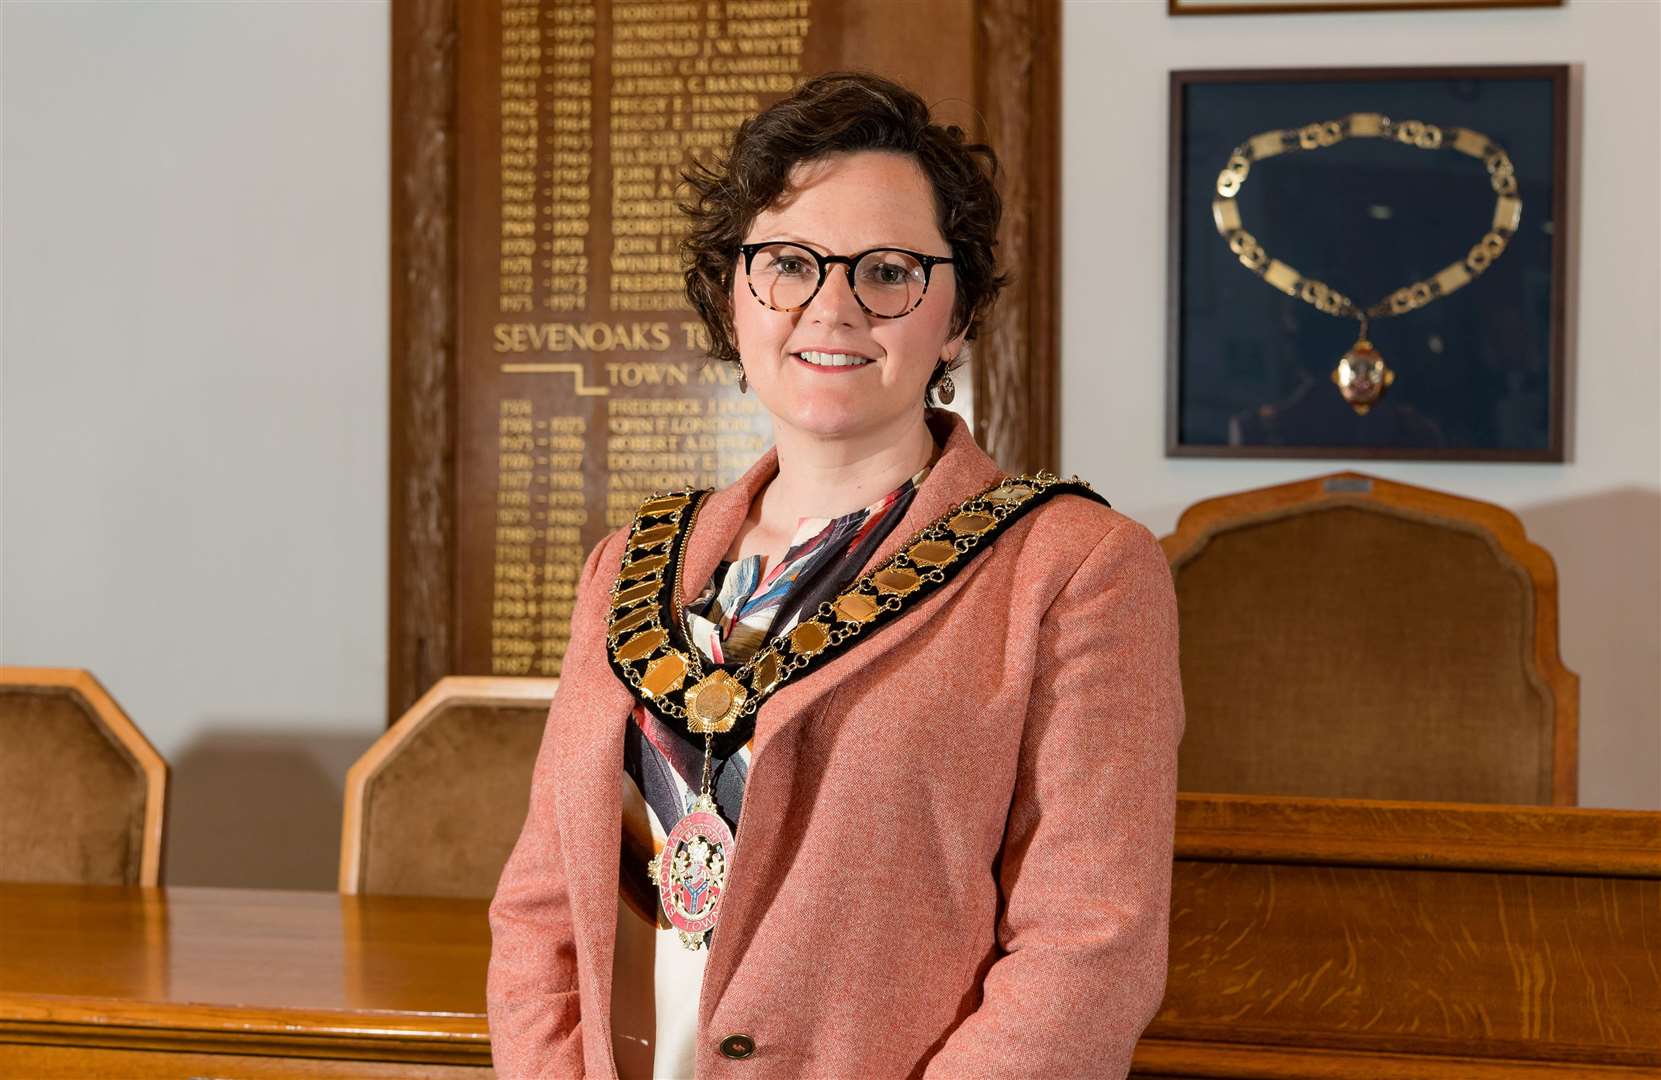 Sevenoaks Town Mayor, Cllr Claire Shea, believes it would boost active travel in the area